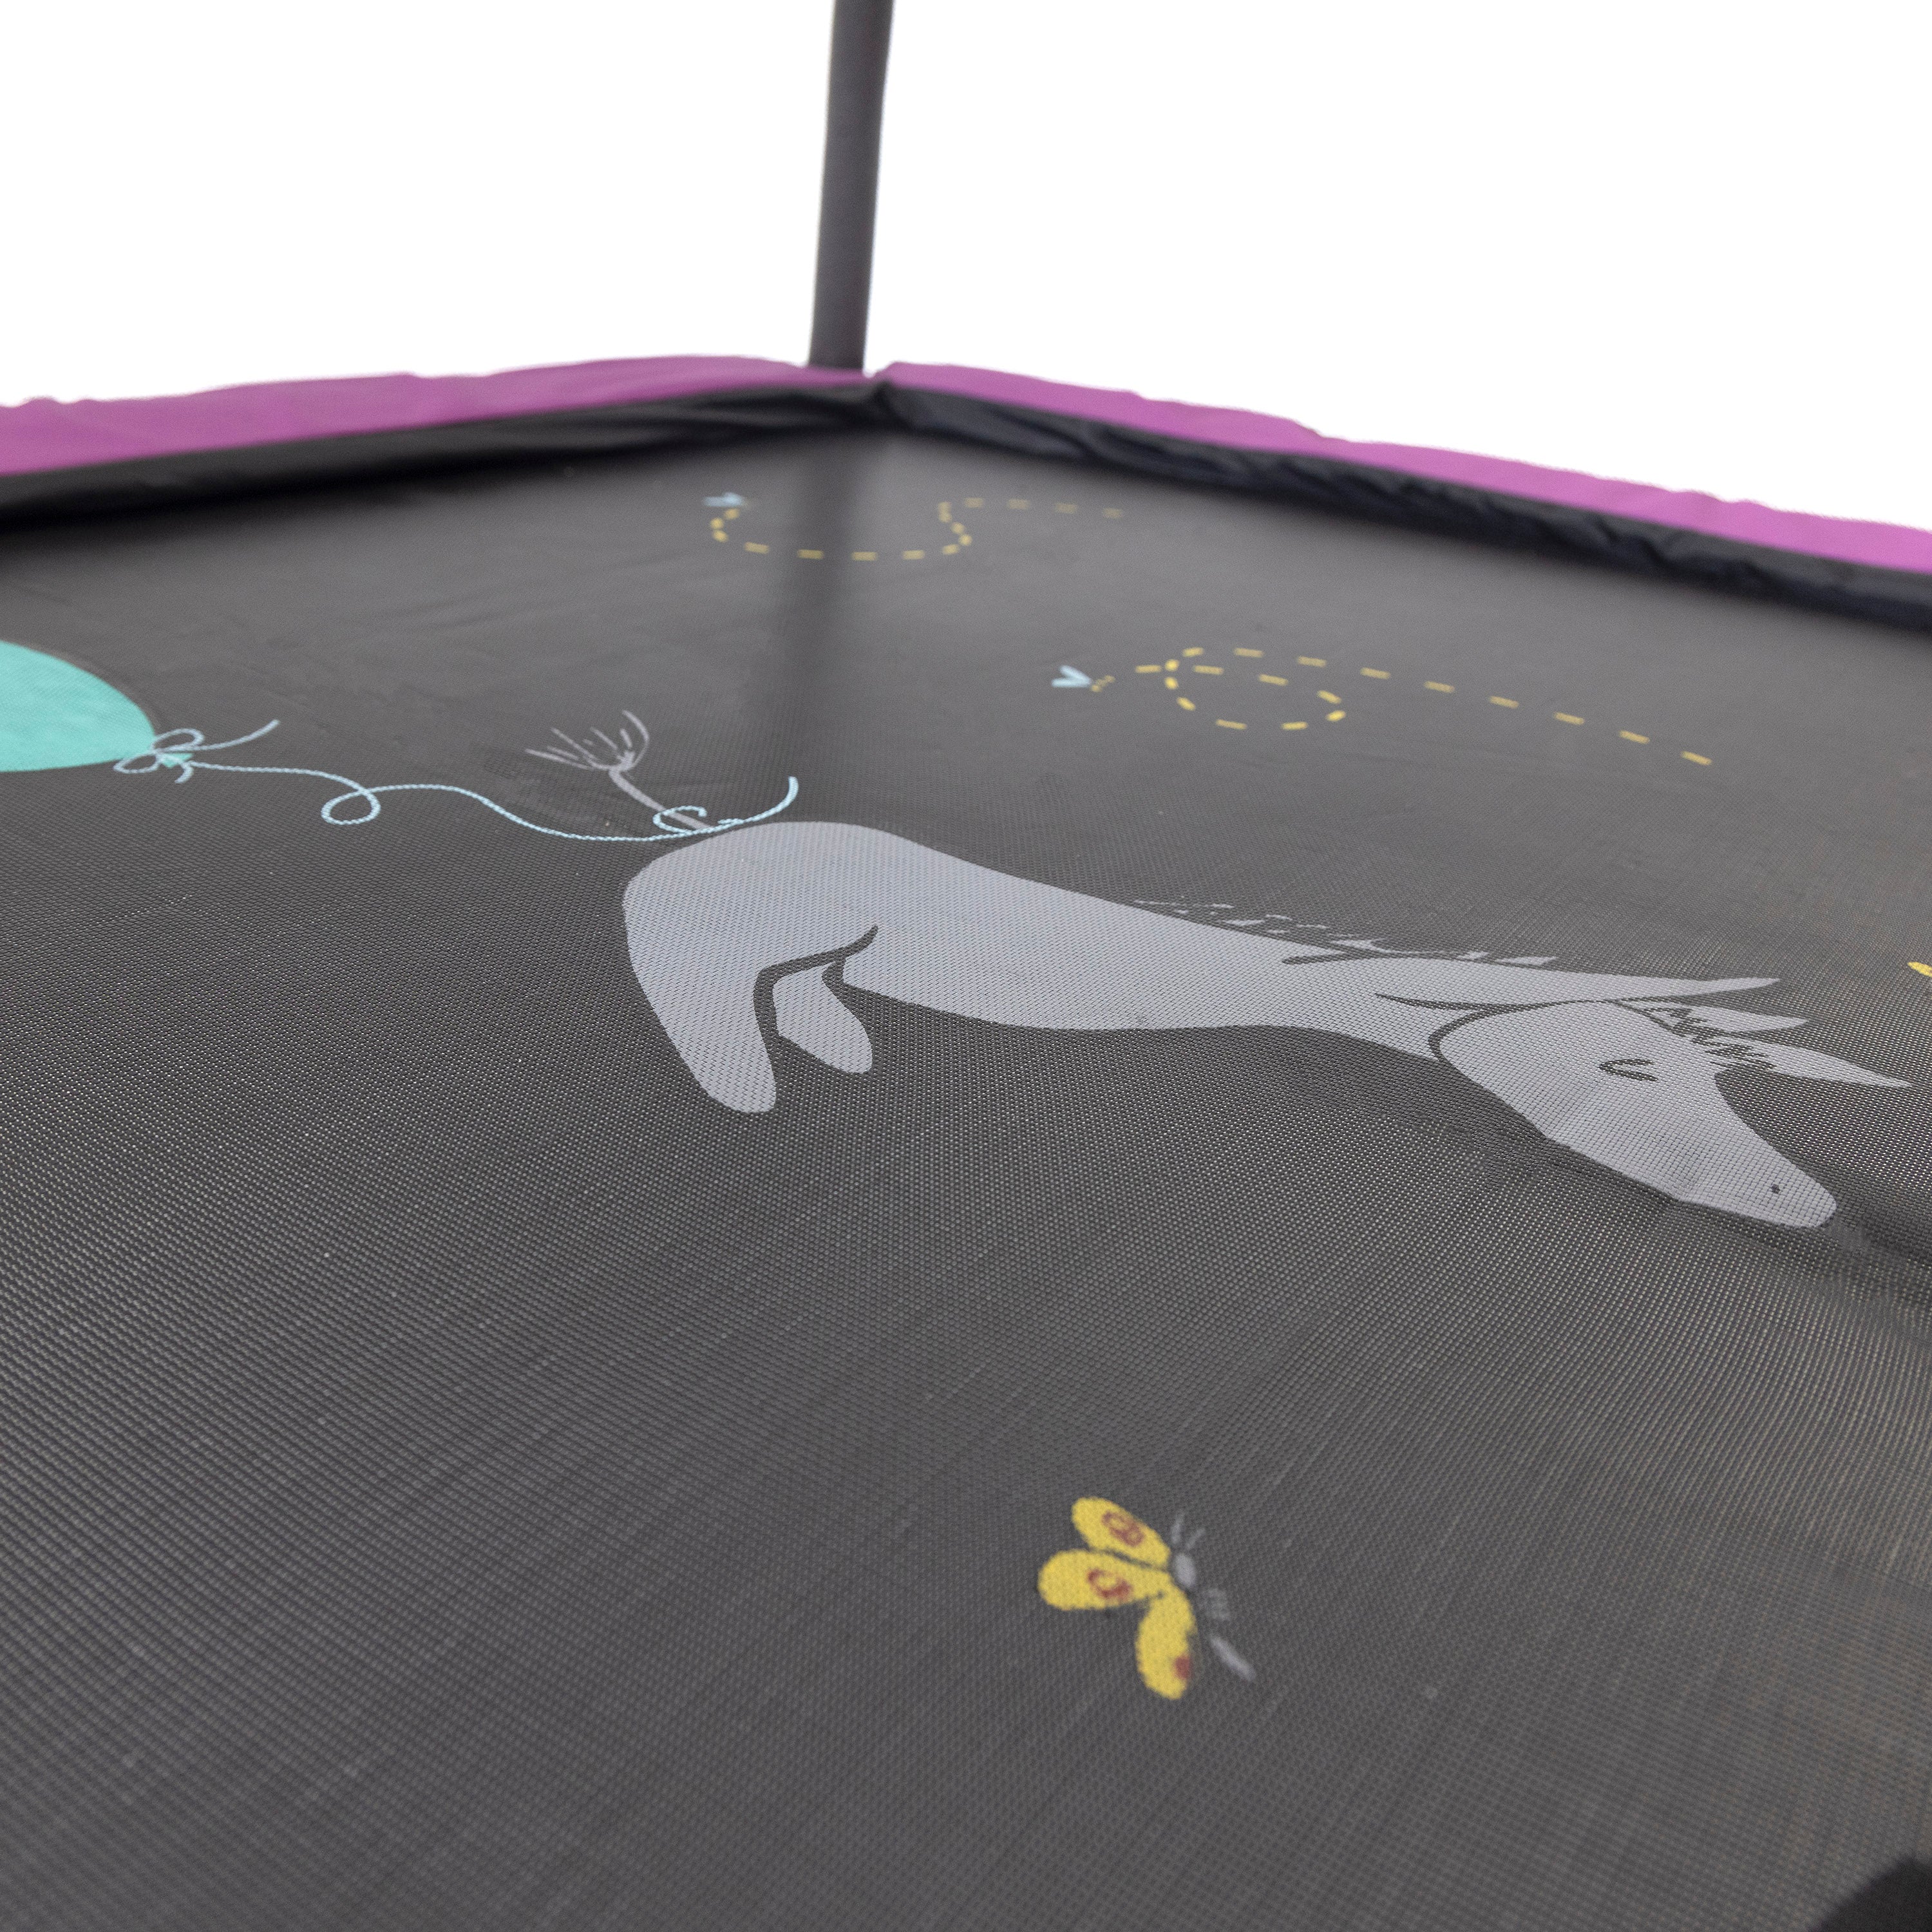 Eeyore with a balloon tied to his tail is printed on the jump mat. 